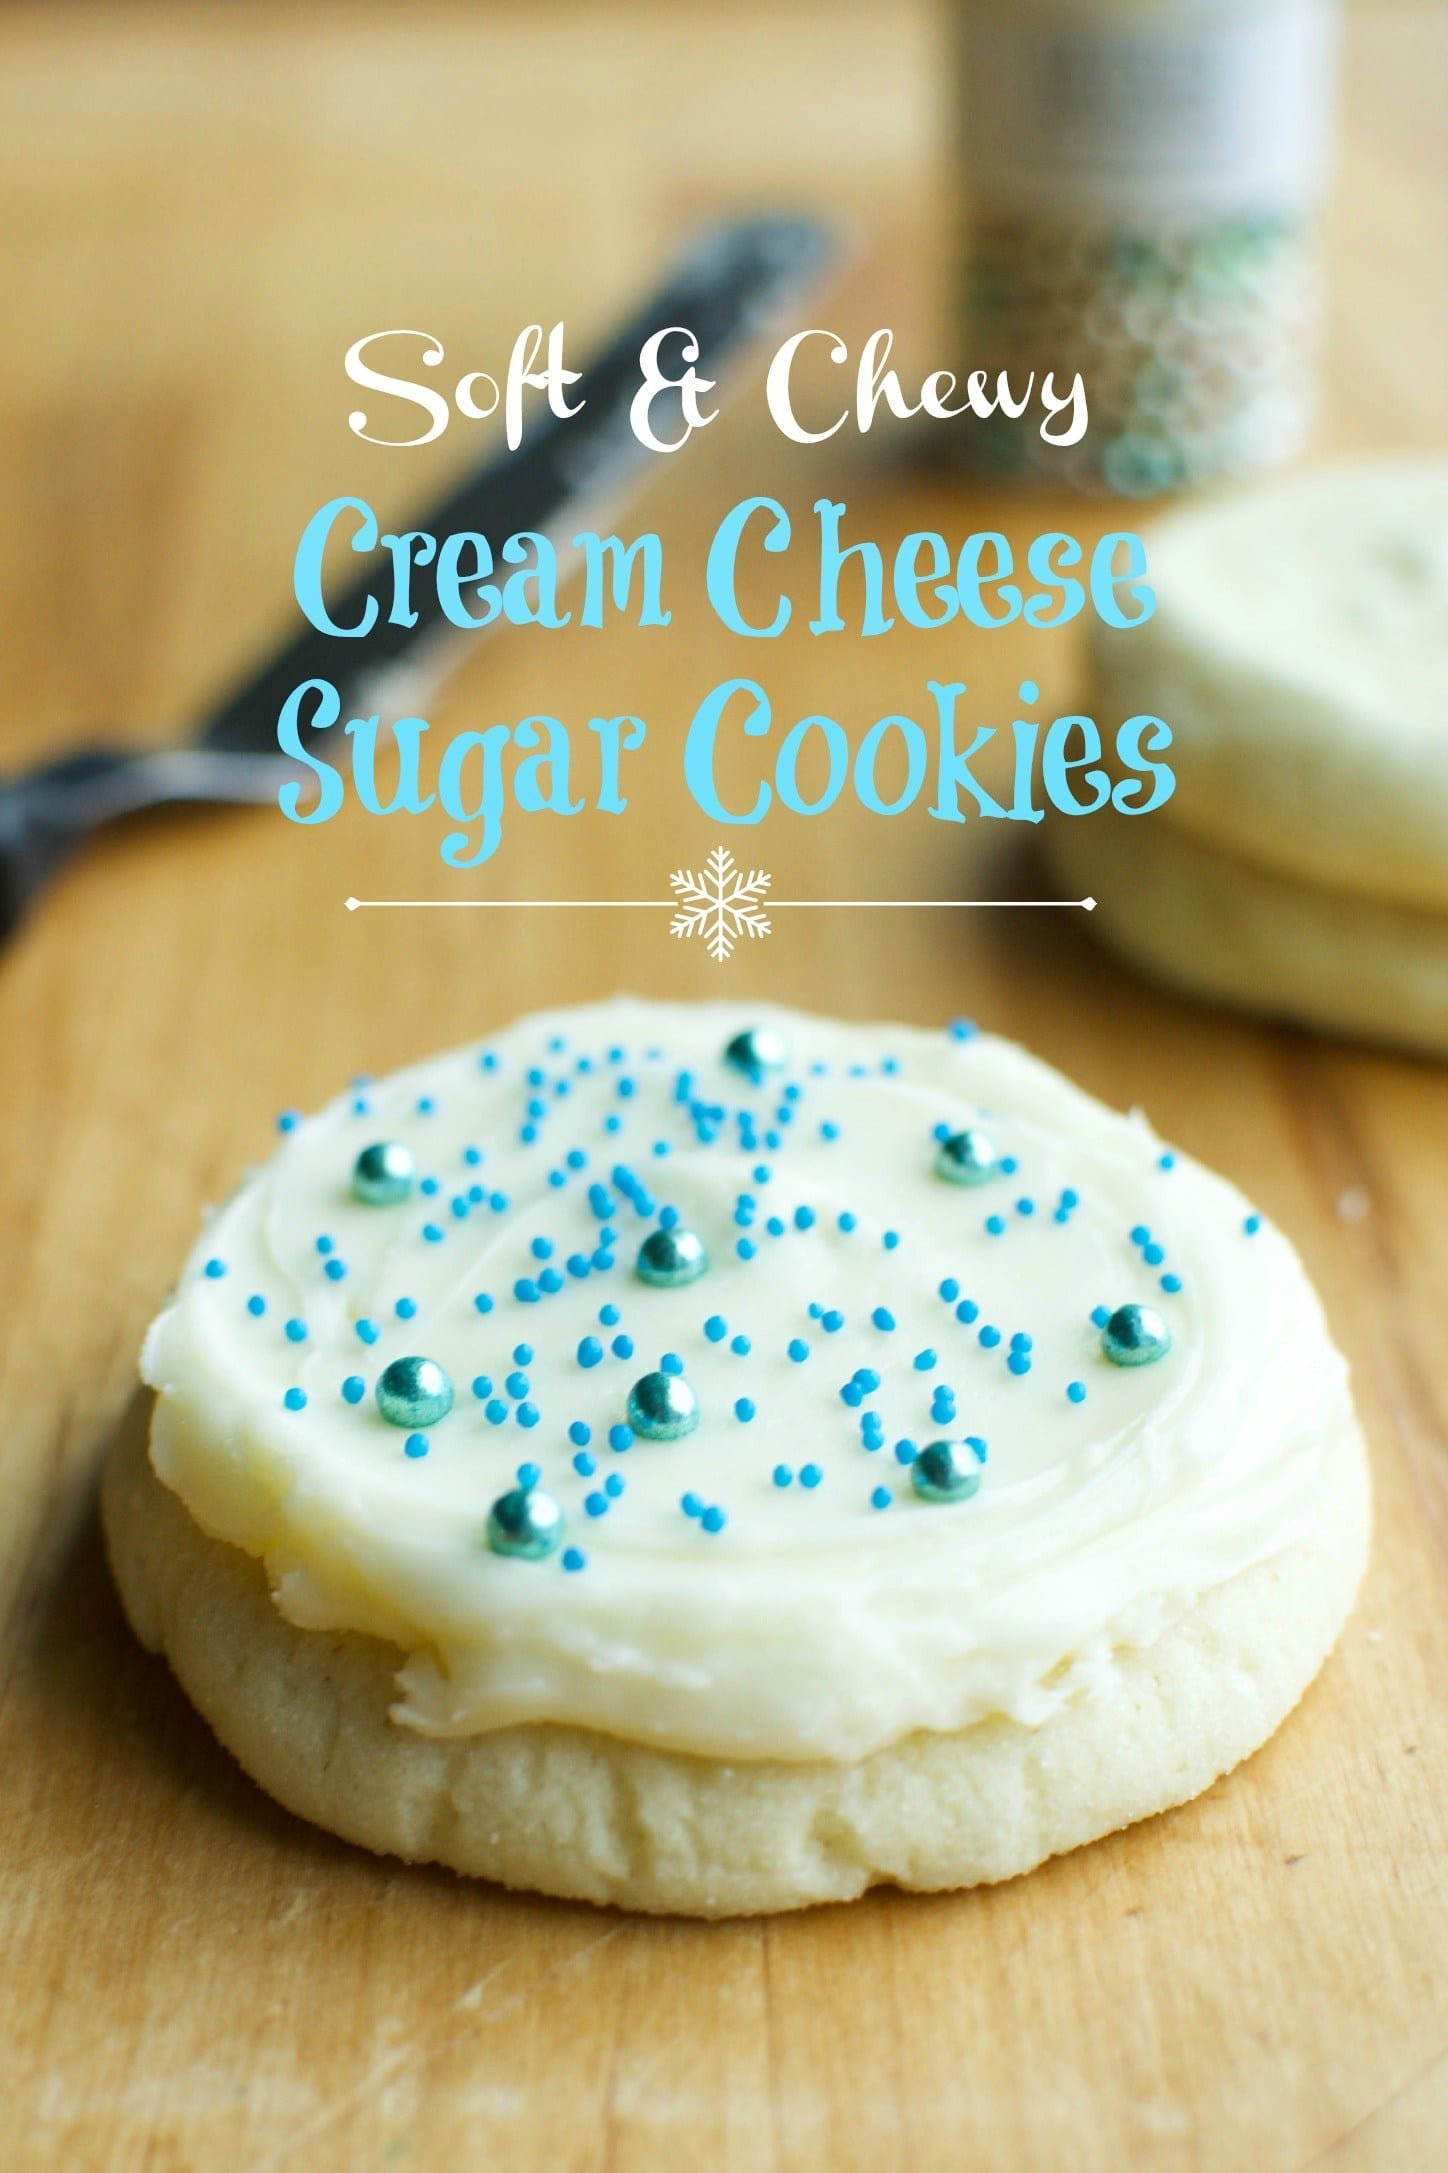 Sugar Cookies With Cream Cheese